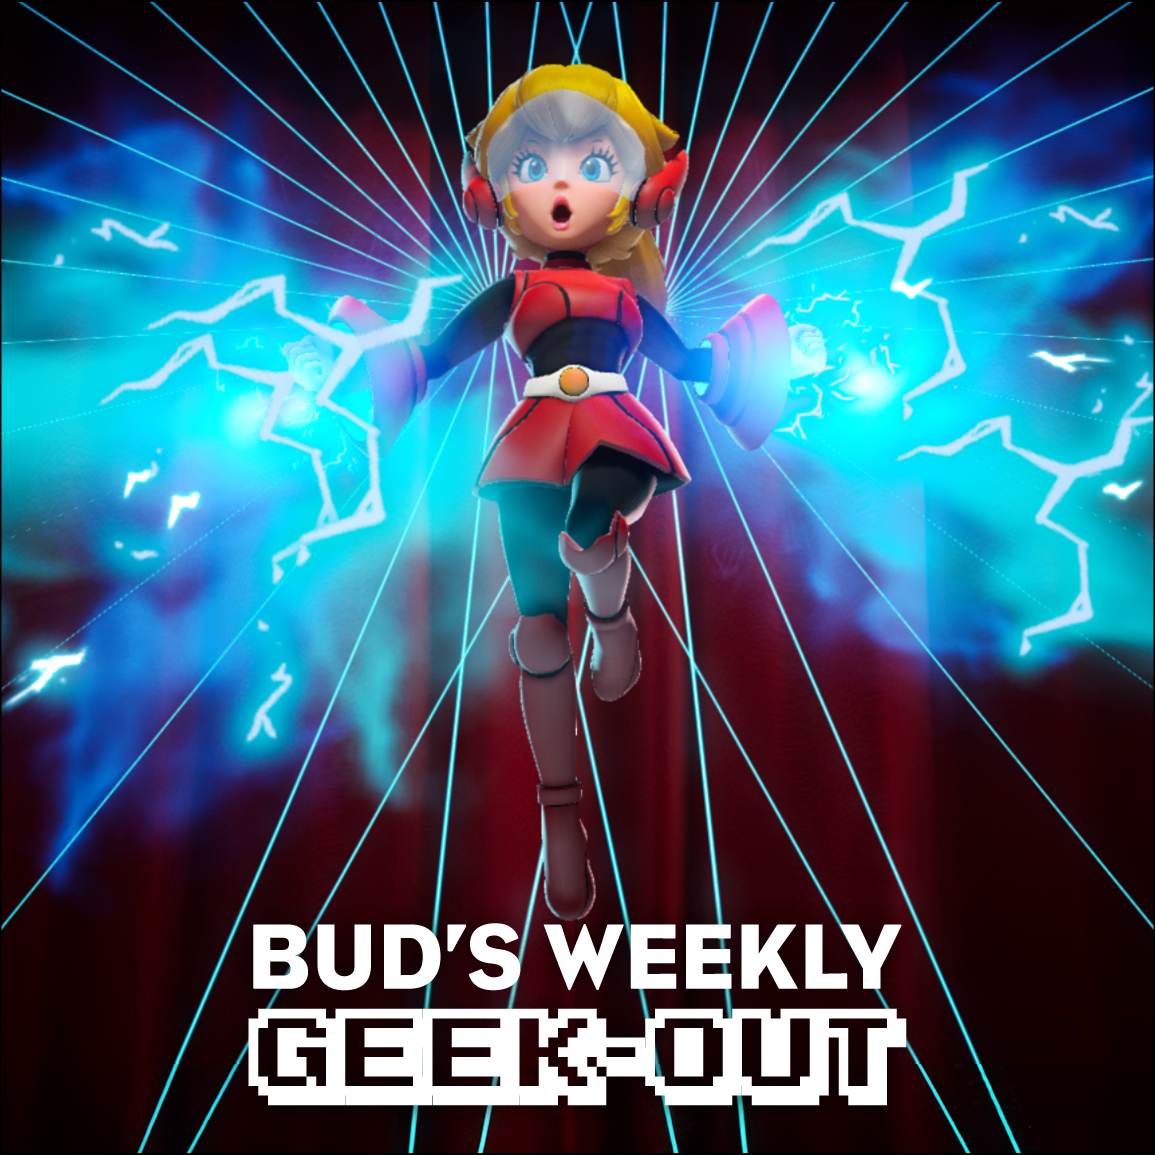 Bud's Weekly Geek-out! 20240327 - Princess Peach-Showtime